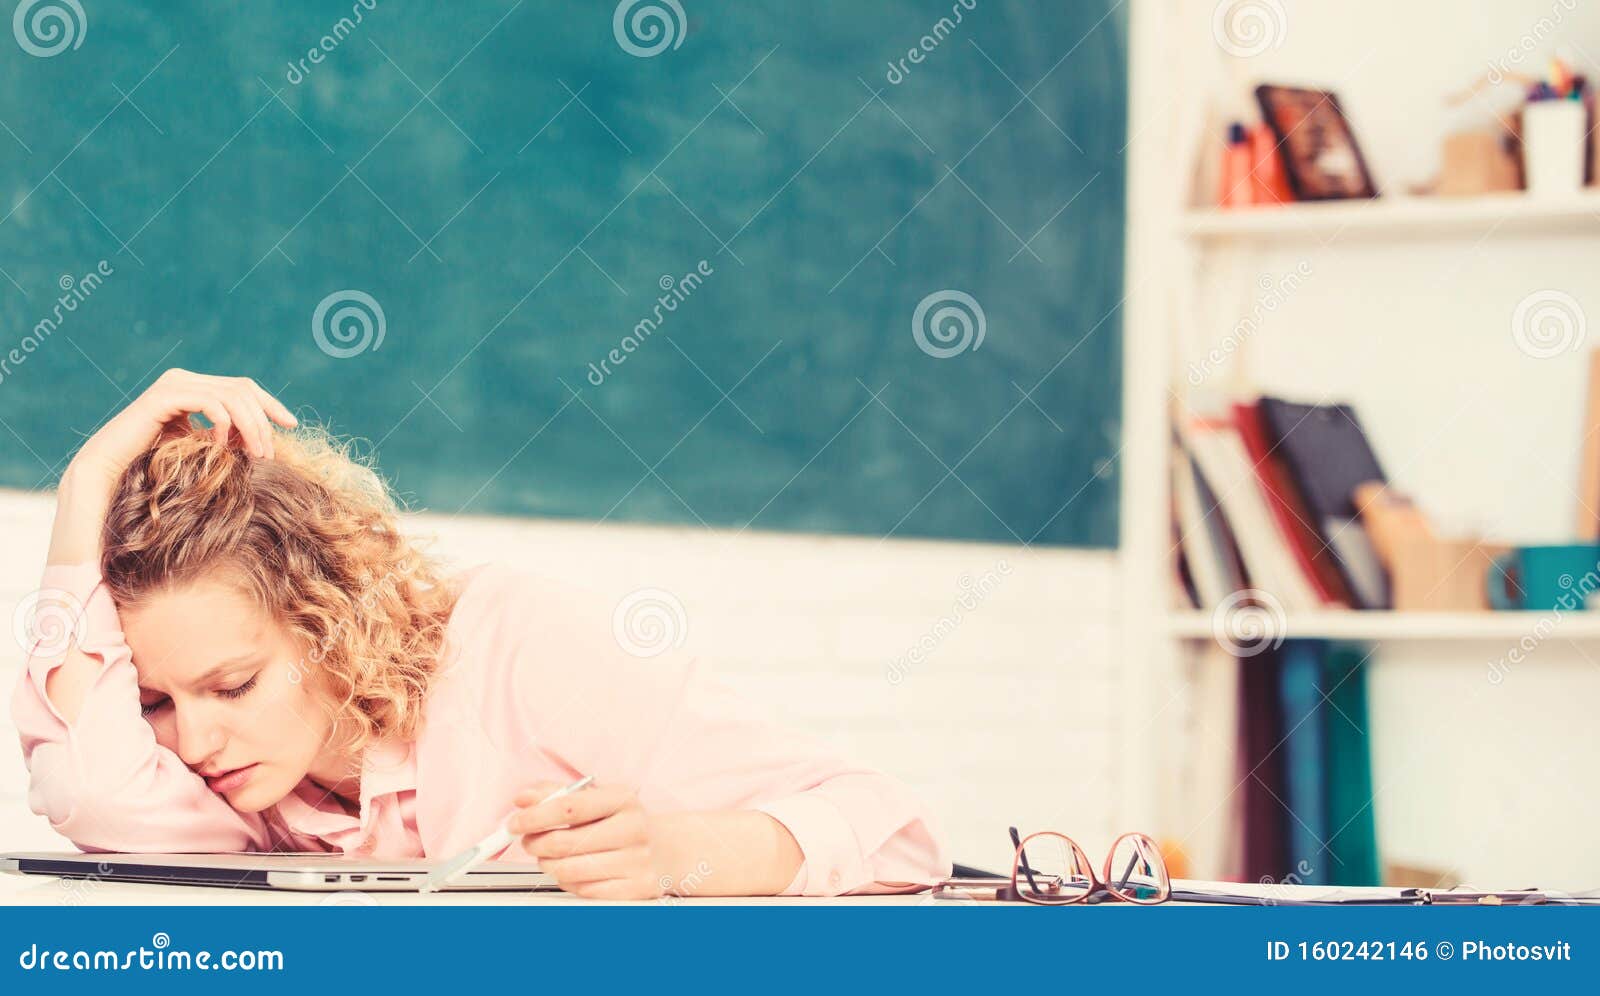 Tired Tutor Fall Asleep At Workplace Tired Student Lean On Desk